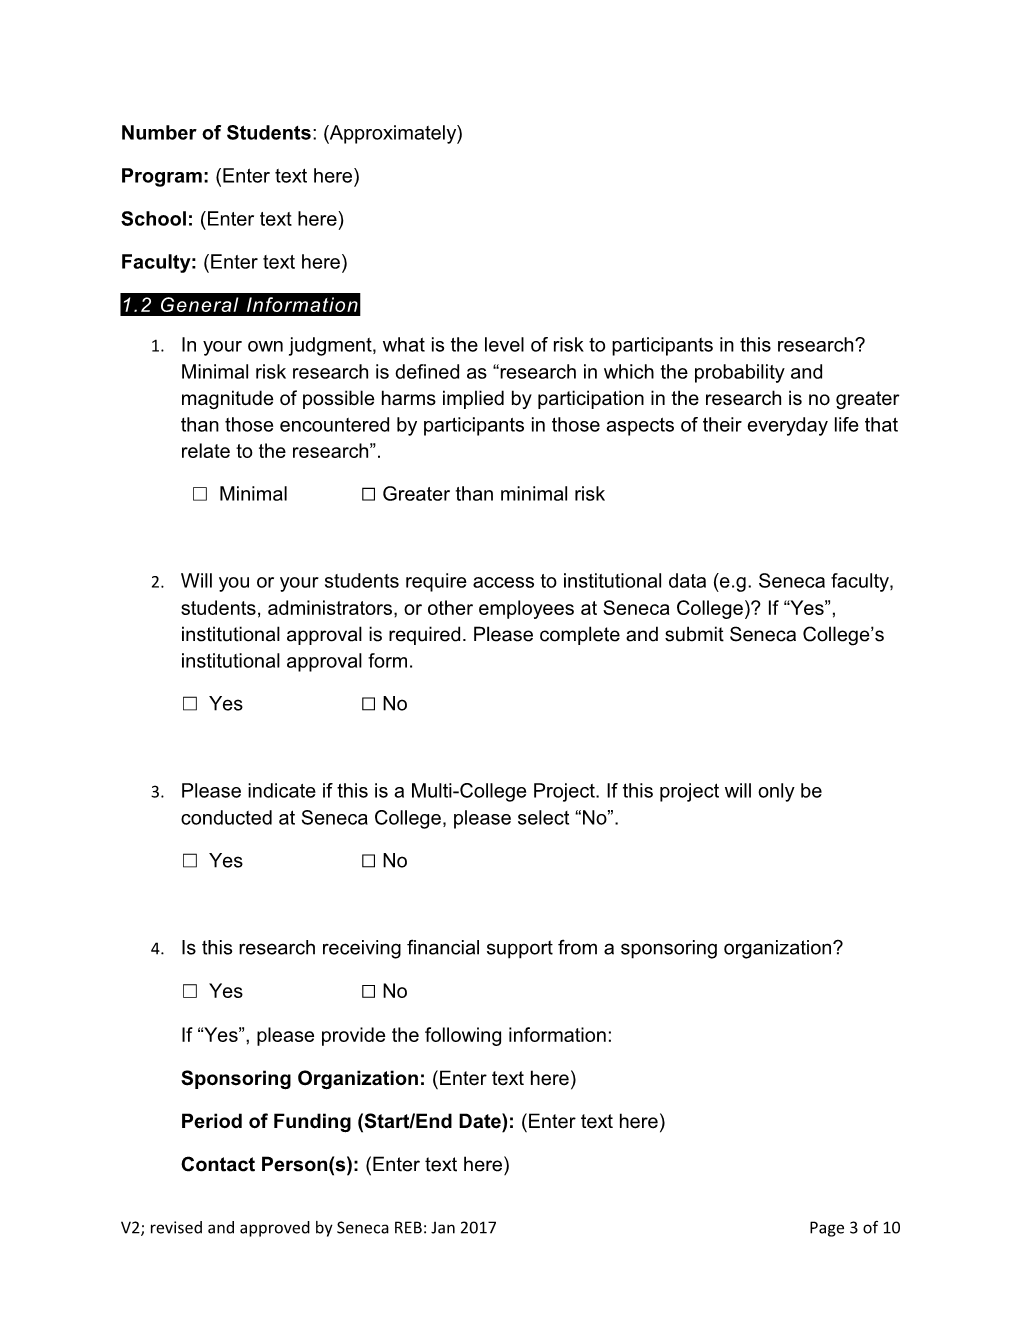 REB Course-Based Research Designation Form